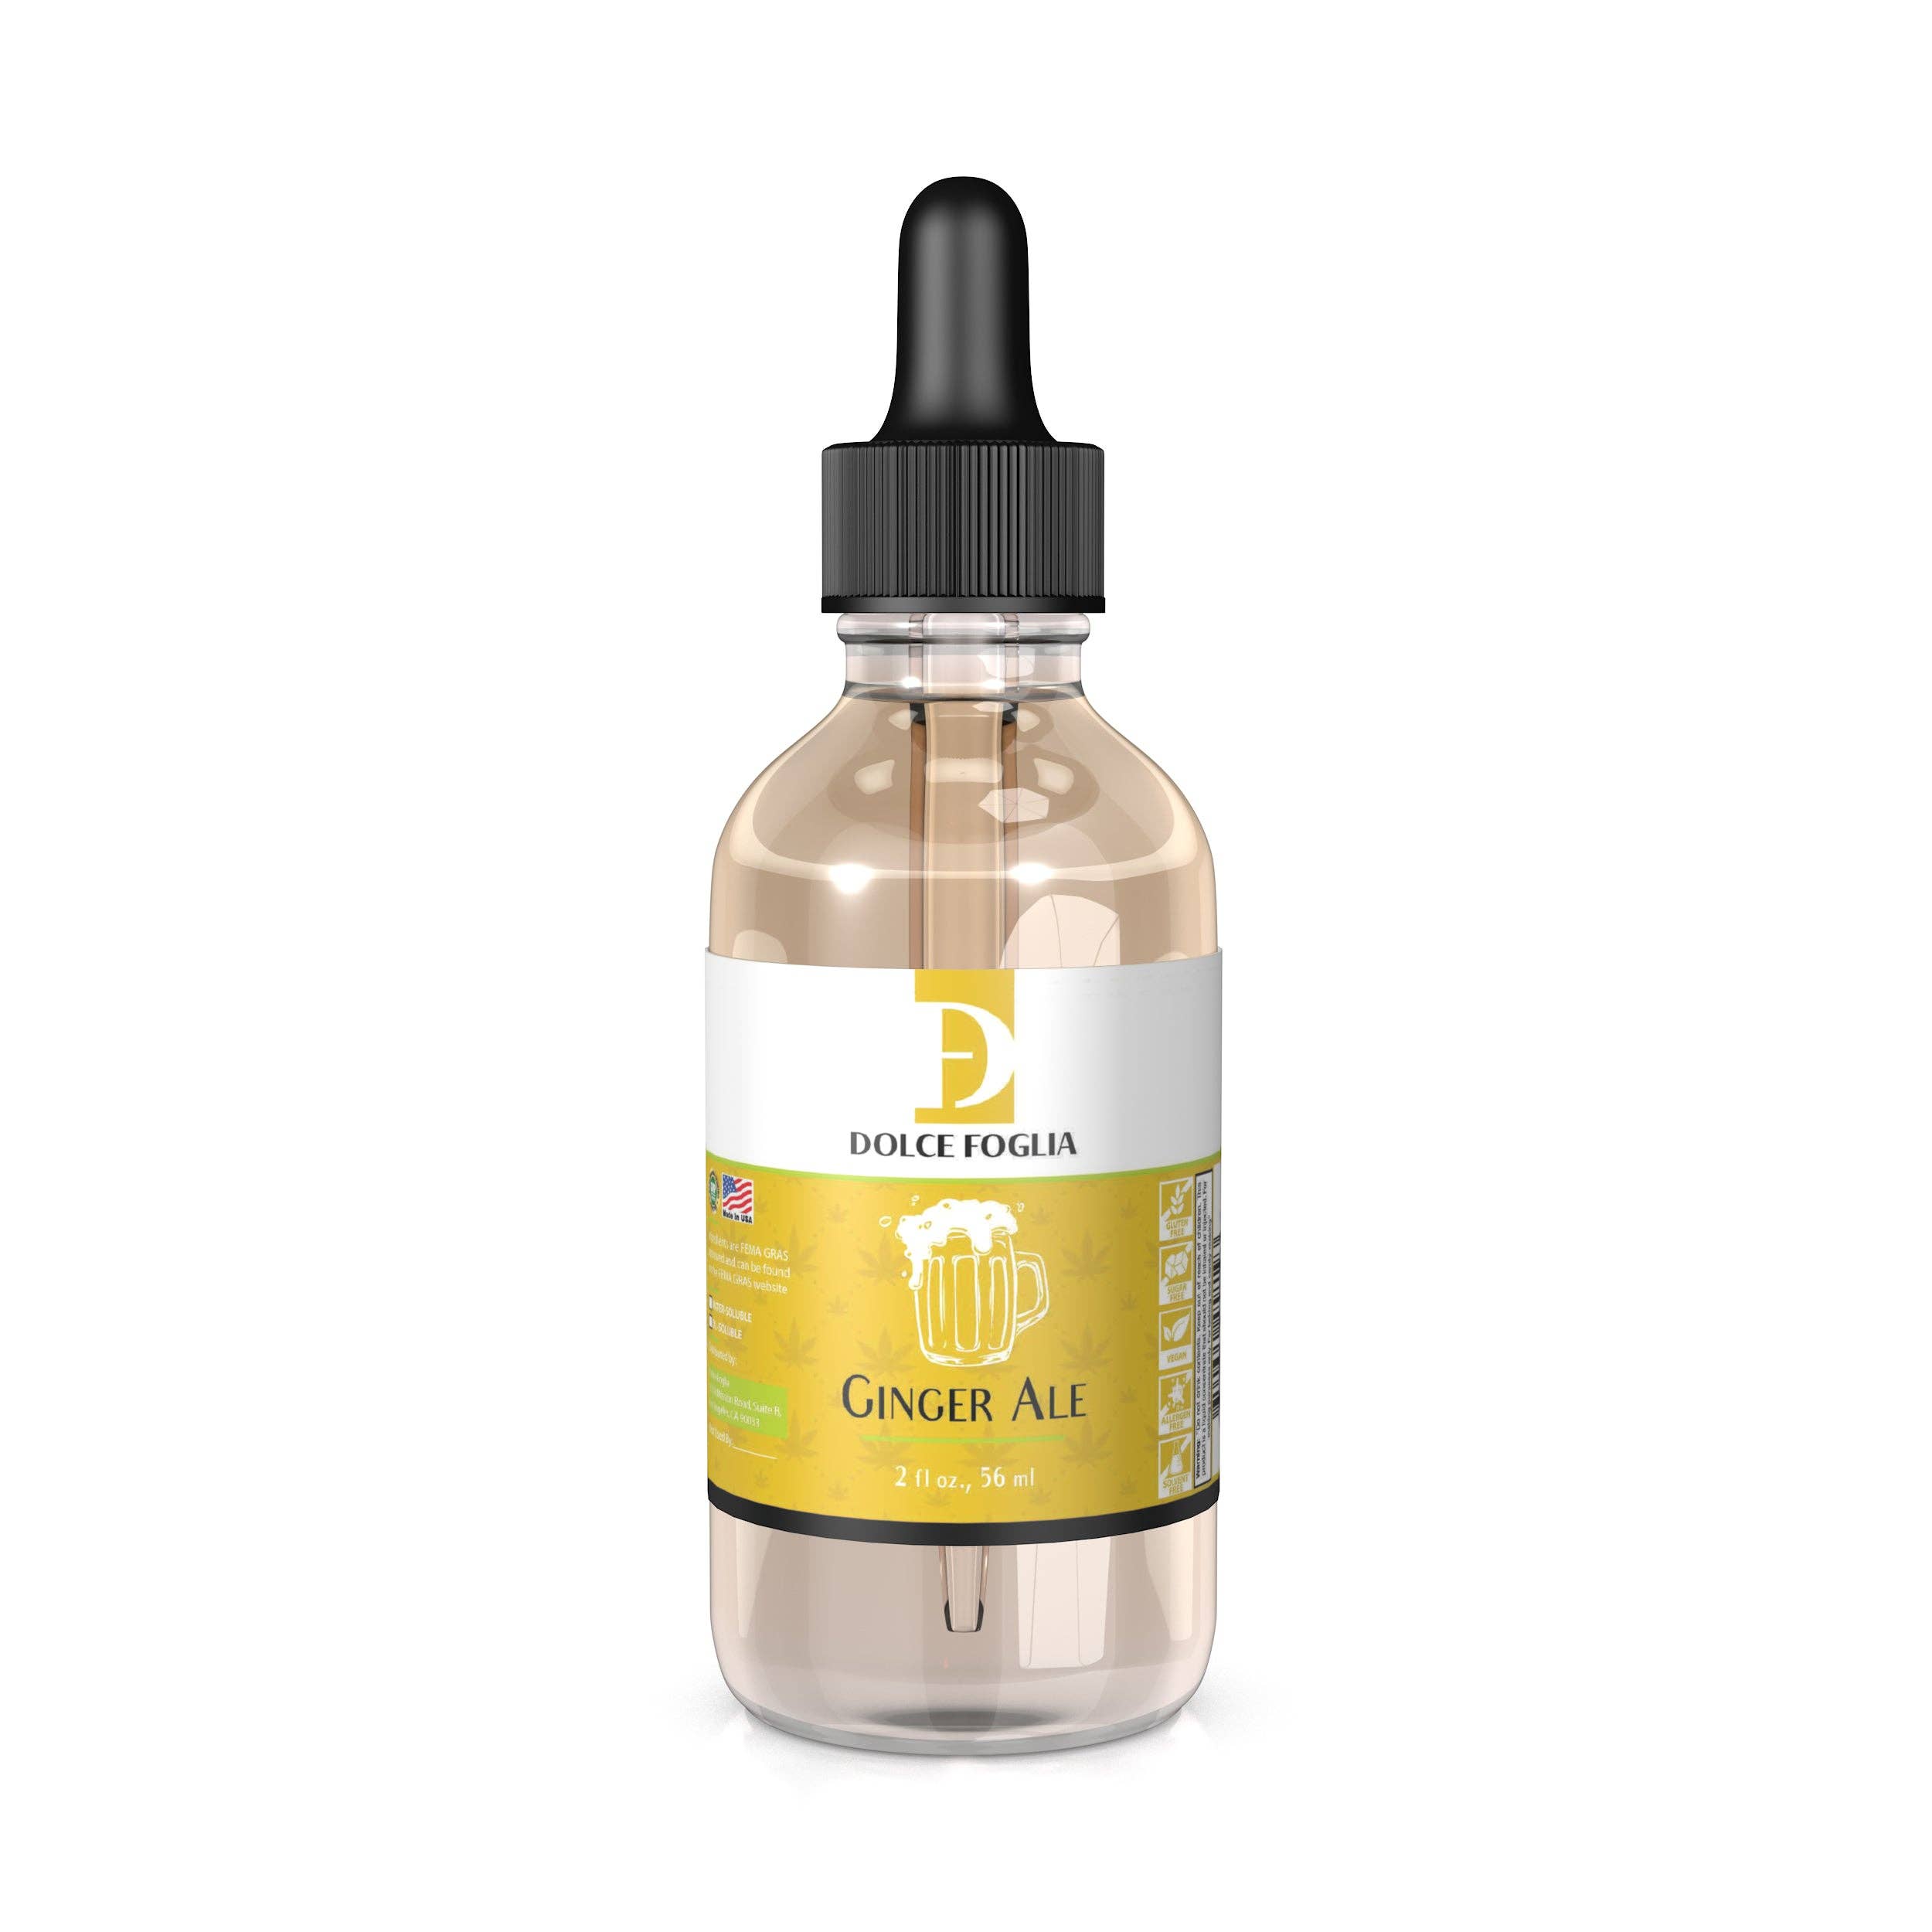 Dolce Foglia Banana Flavoring Oil - 2 Oz. - Flavoring Oil for Candy Making,  Extracts and Flavorings for Baking, Lip Balm, Cookies, Ice Cream 